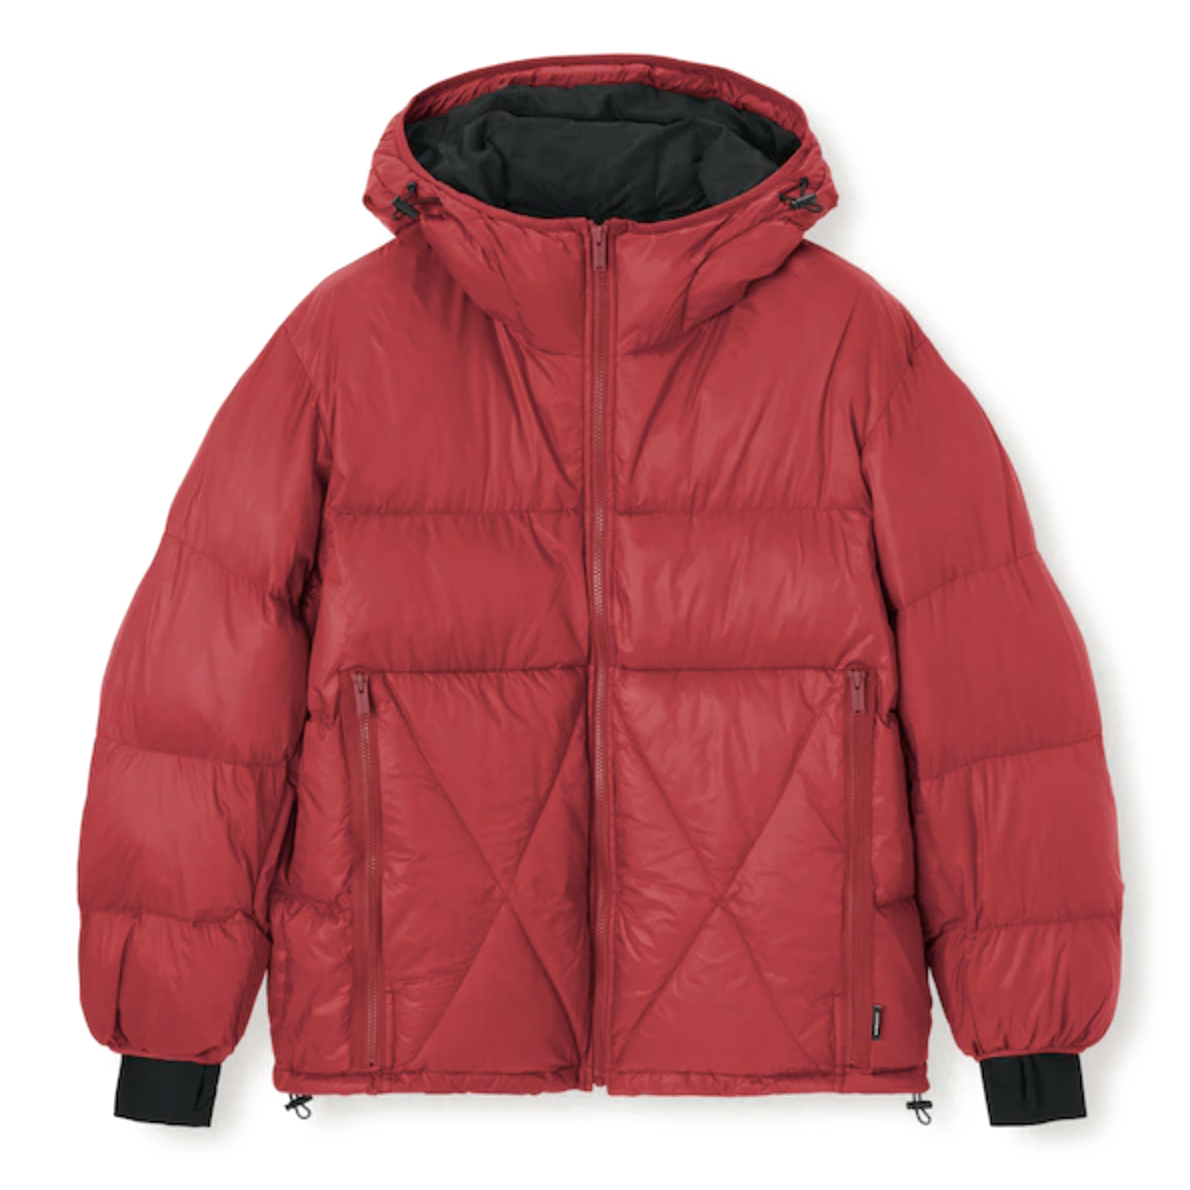 Uniqlo GU x Undercover Padded Quilted Blouson Red Men's 